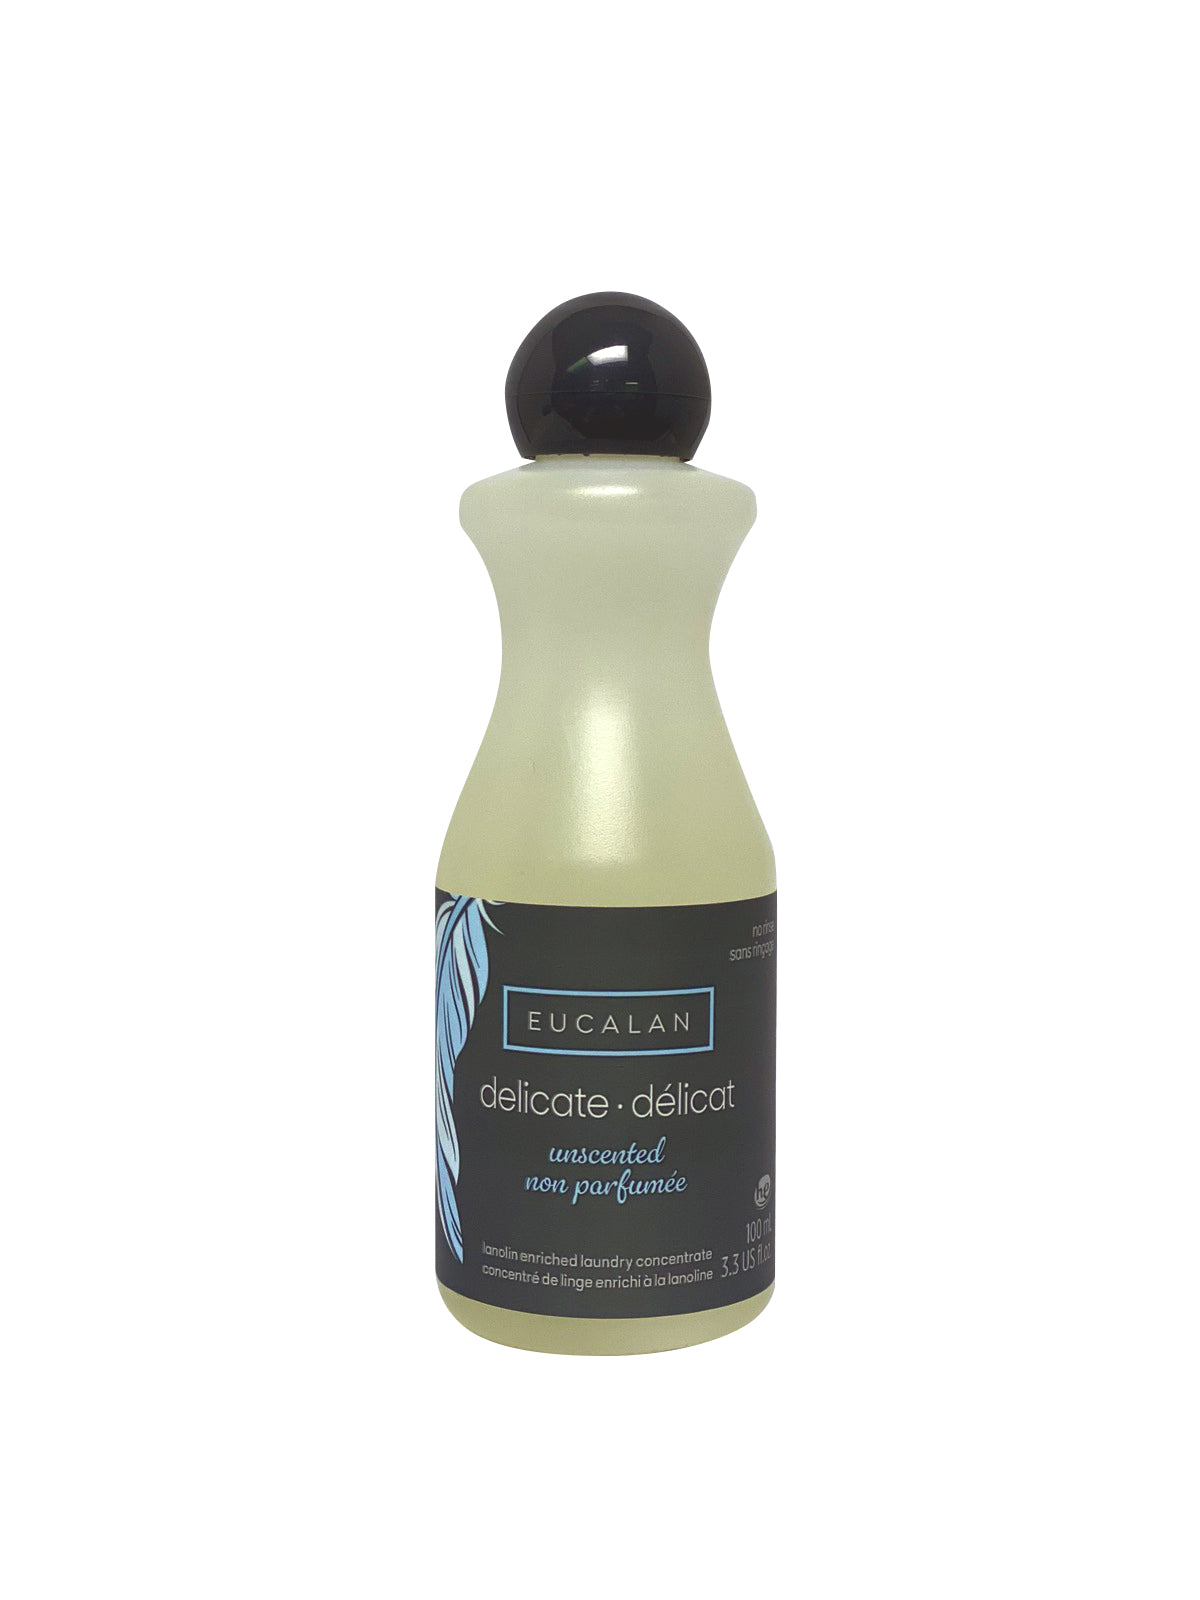 3.3 ounce bottle of Eucalan Unscented for 20 washes